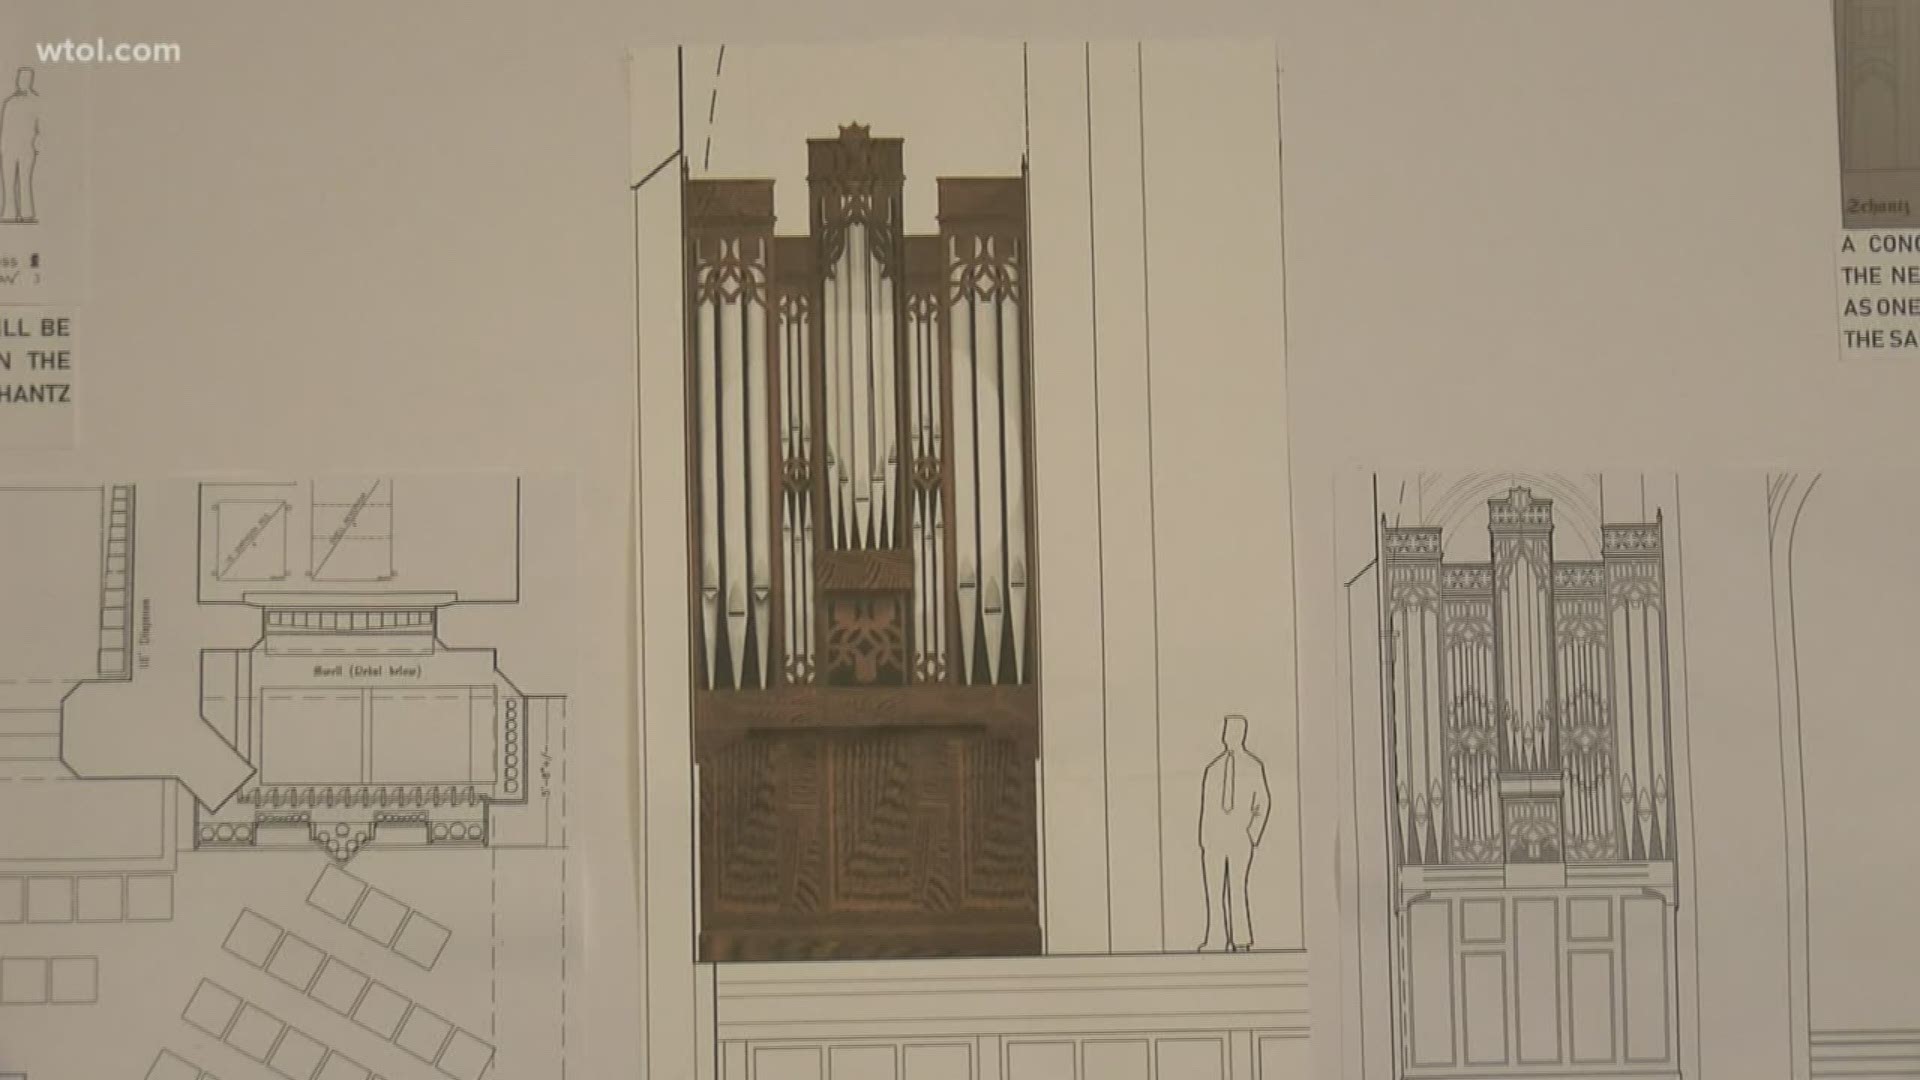 The project to renovate the 1935 instrument started with a fundraiser 10 years ago.